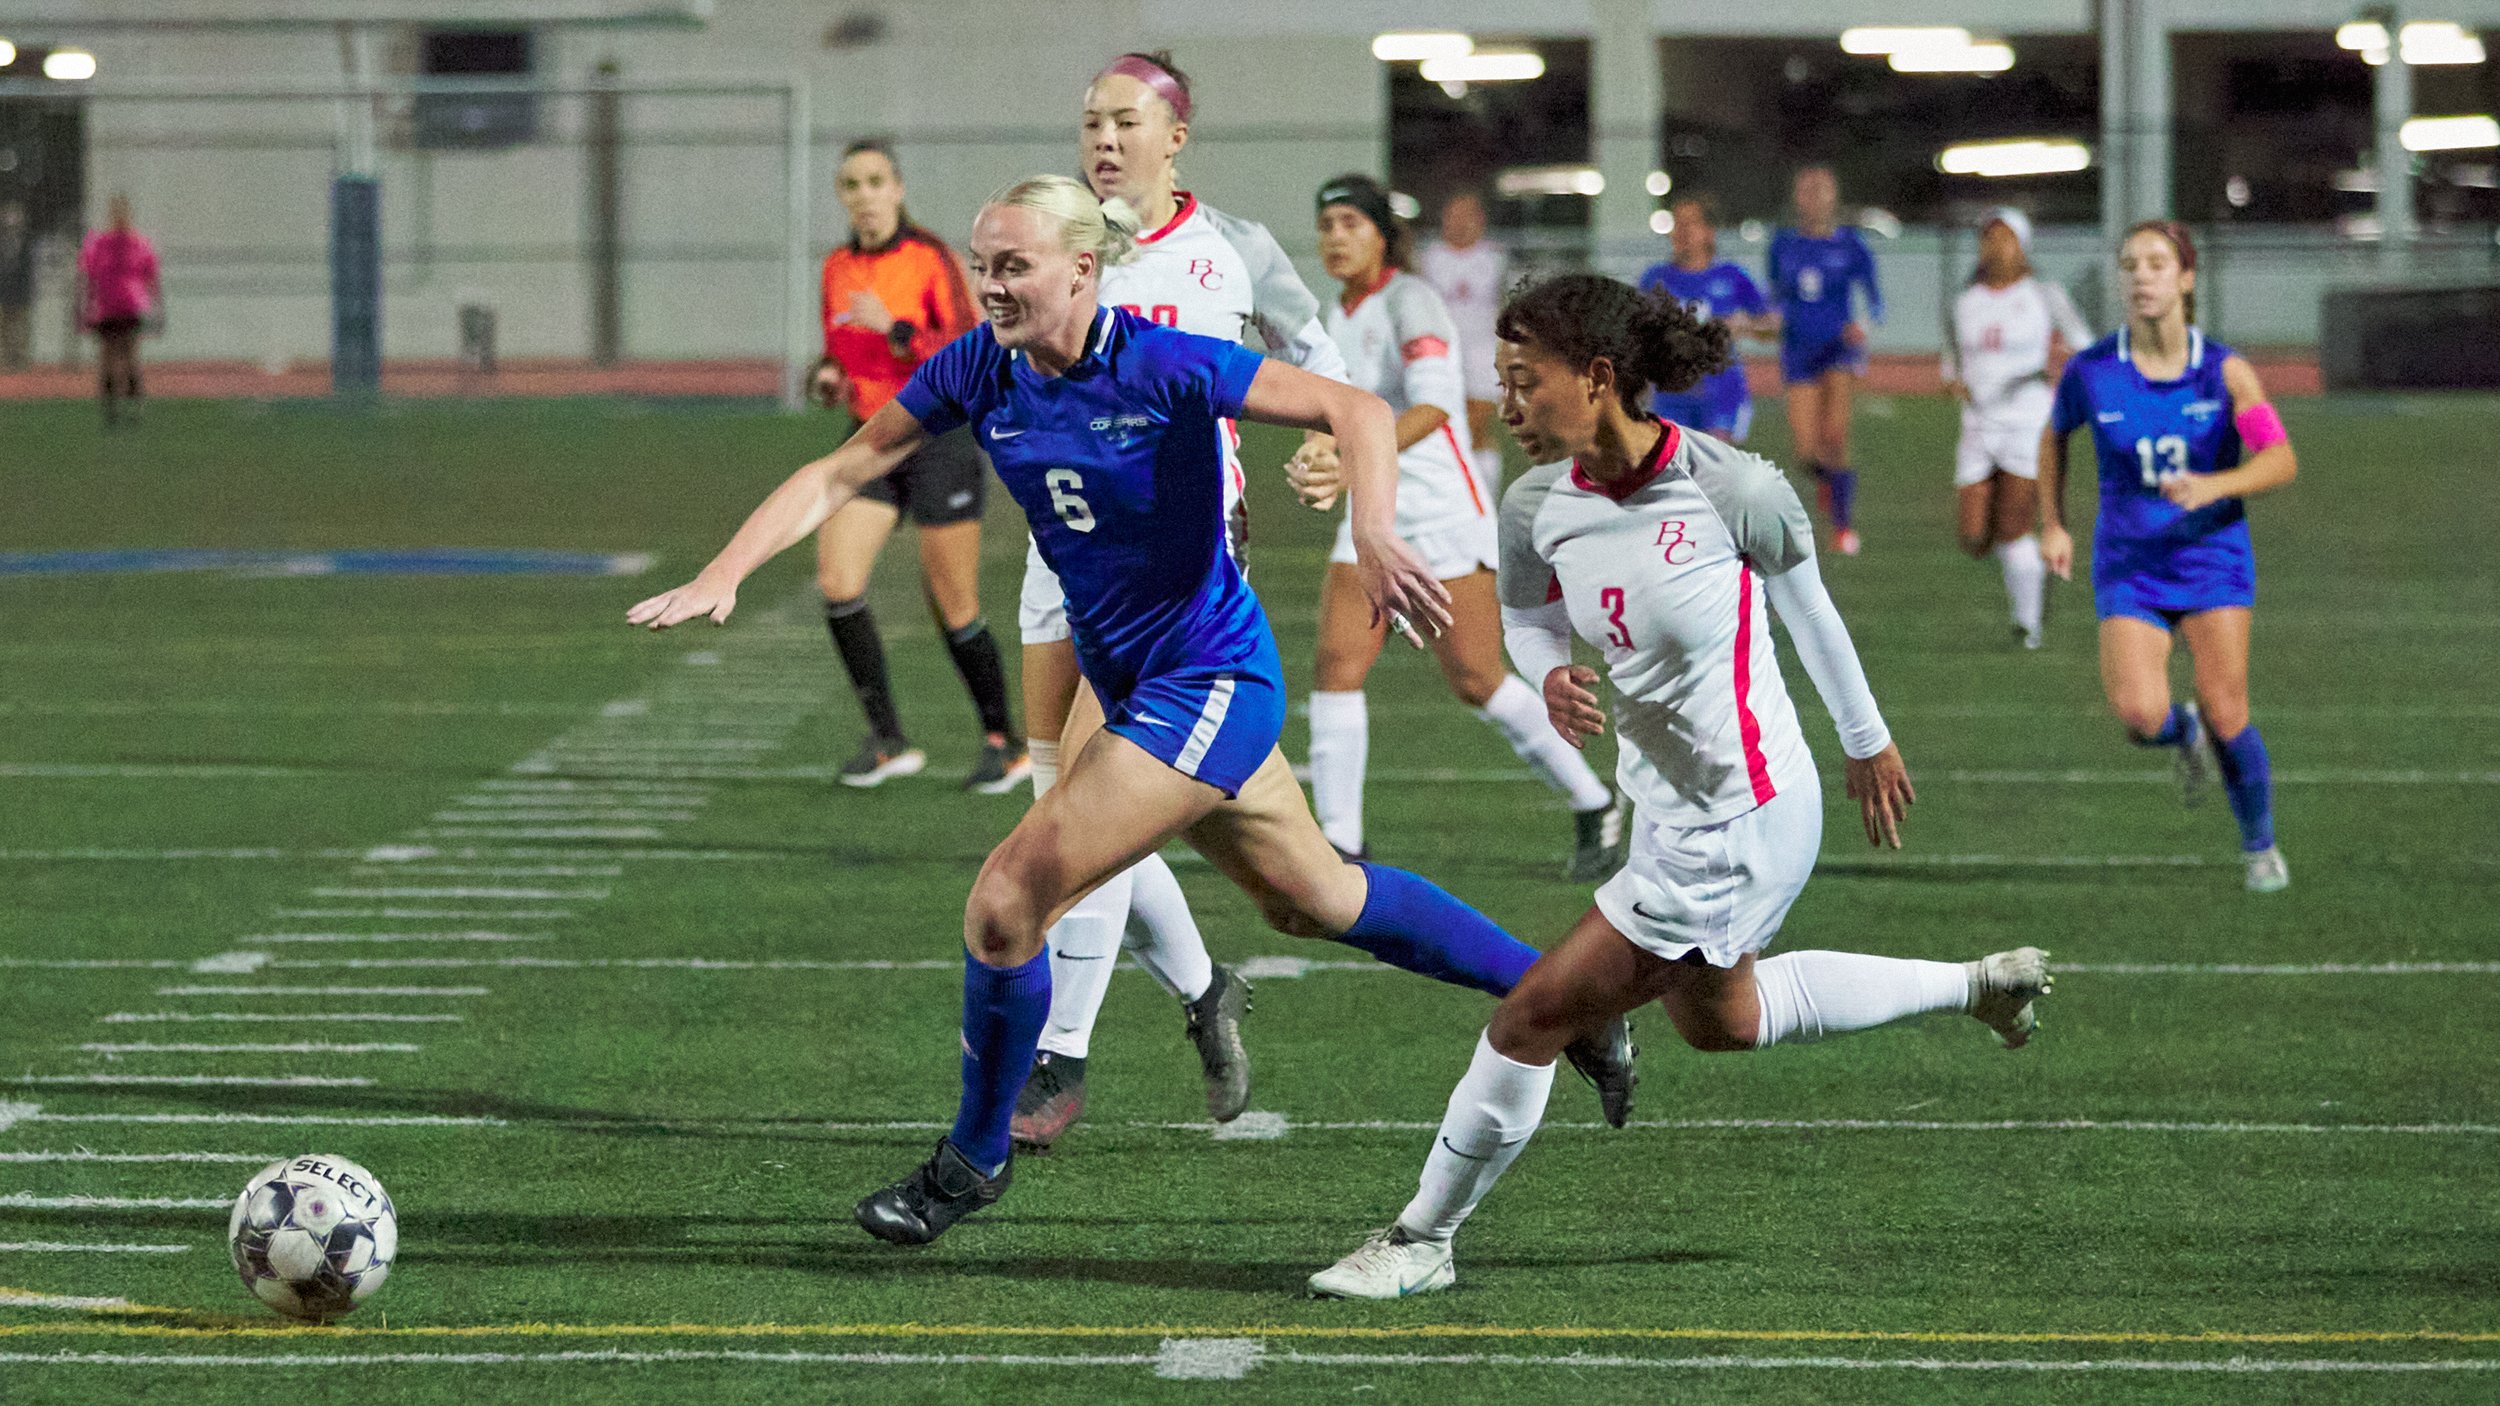  Santa Monica College Corsairs' Mathilda Isaksson and Bakersfield College Renegades' Cali McFarland during the women's soccer match on Wednesday, Nov. 16, 2022, at Corsair Field in Santa Monica, Calif. The Corsairs won 1-0. (Nicholas McCall | The Cor